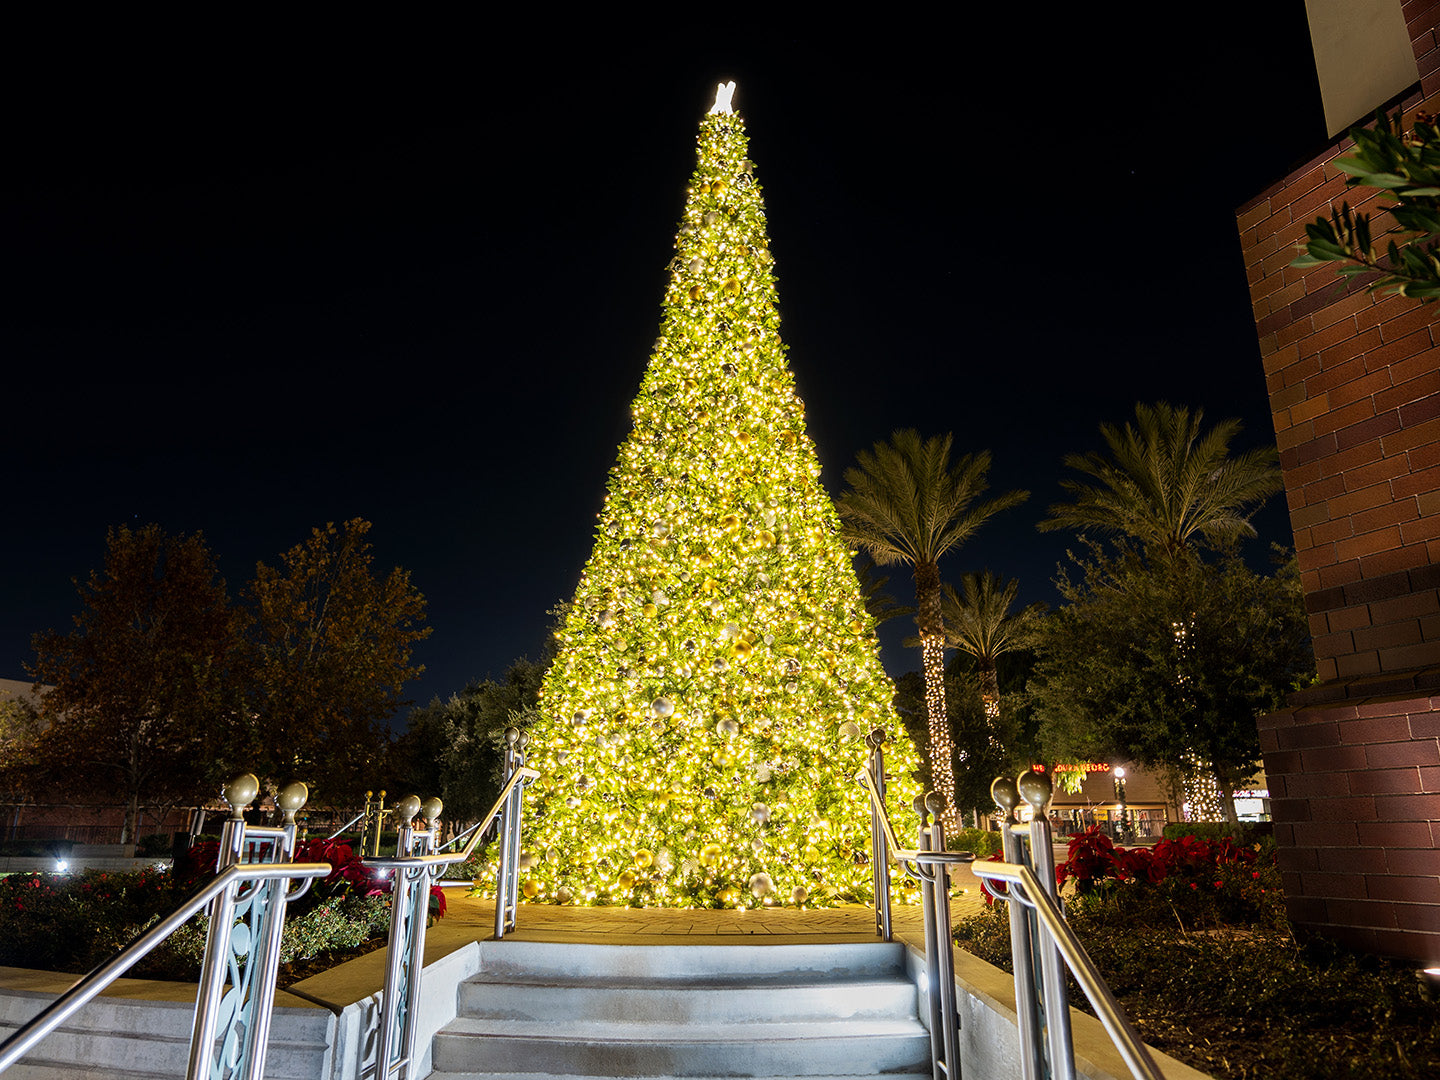 A towering Christmas tree adorned in shimmering gold, crisp white, and gleaming silver ornaments, standing majestically against the night sky.